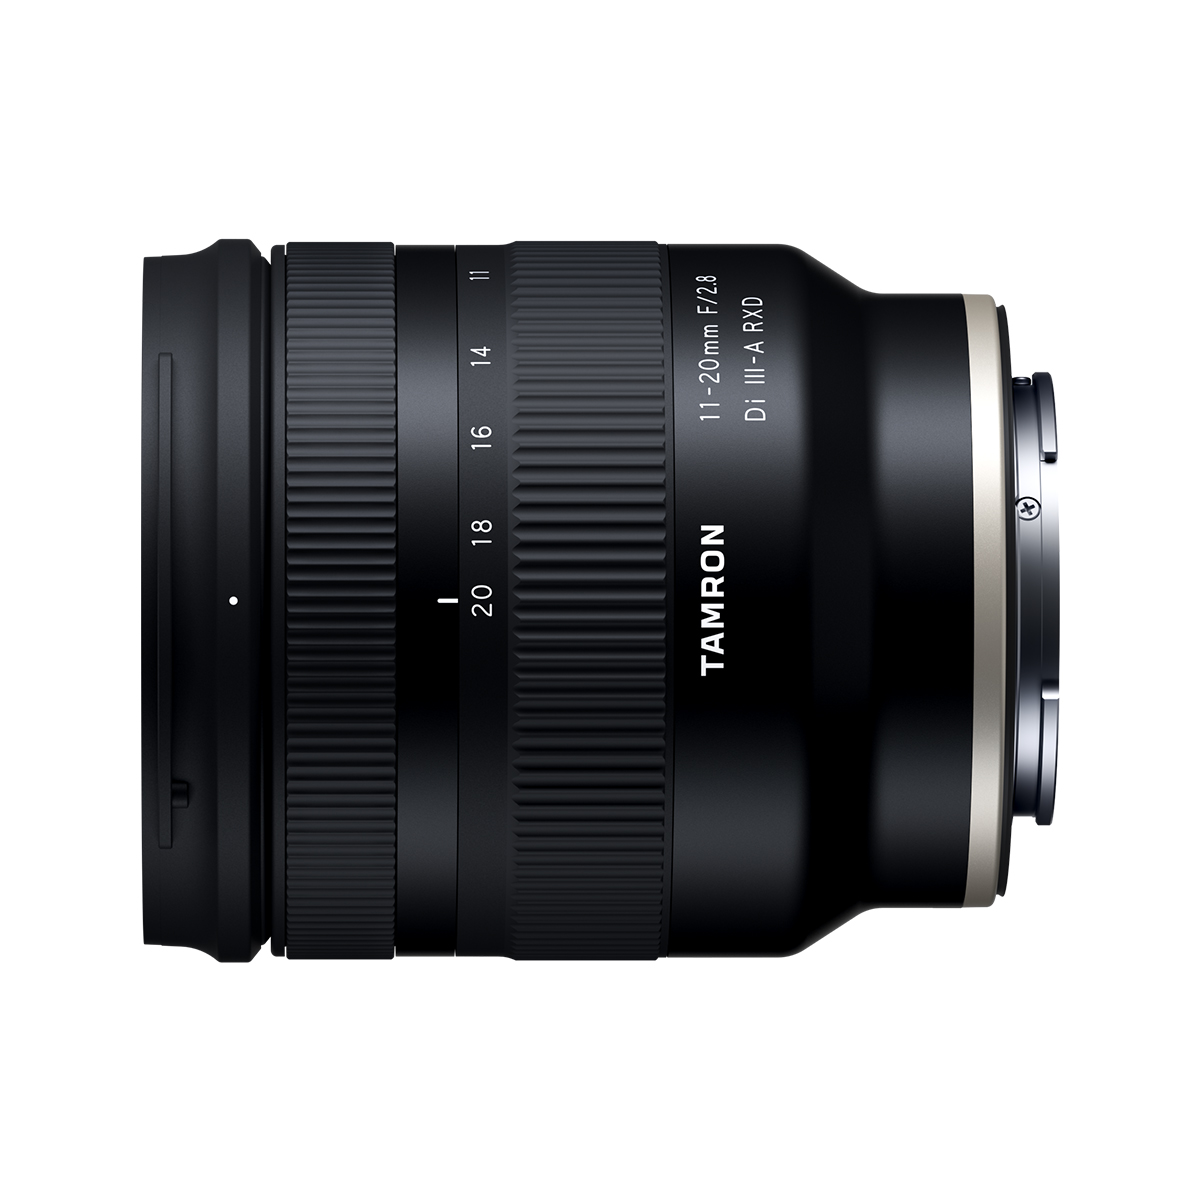 Tamron-11-20mm-f2.8-Di-III-A-RXD-Lens-Image-2 - Camera Times